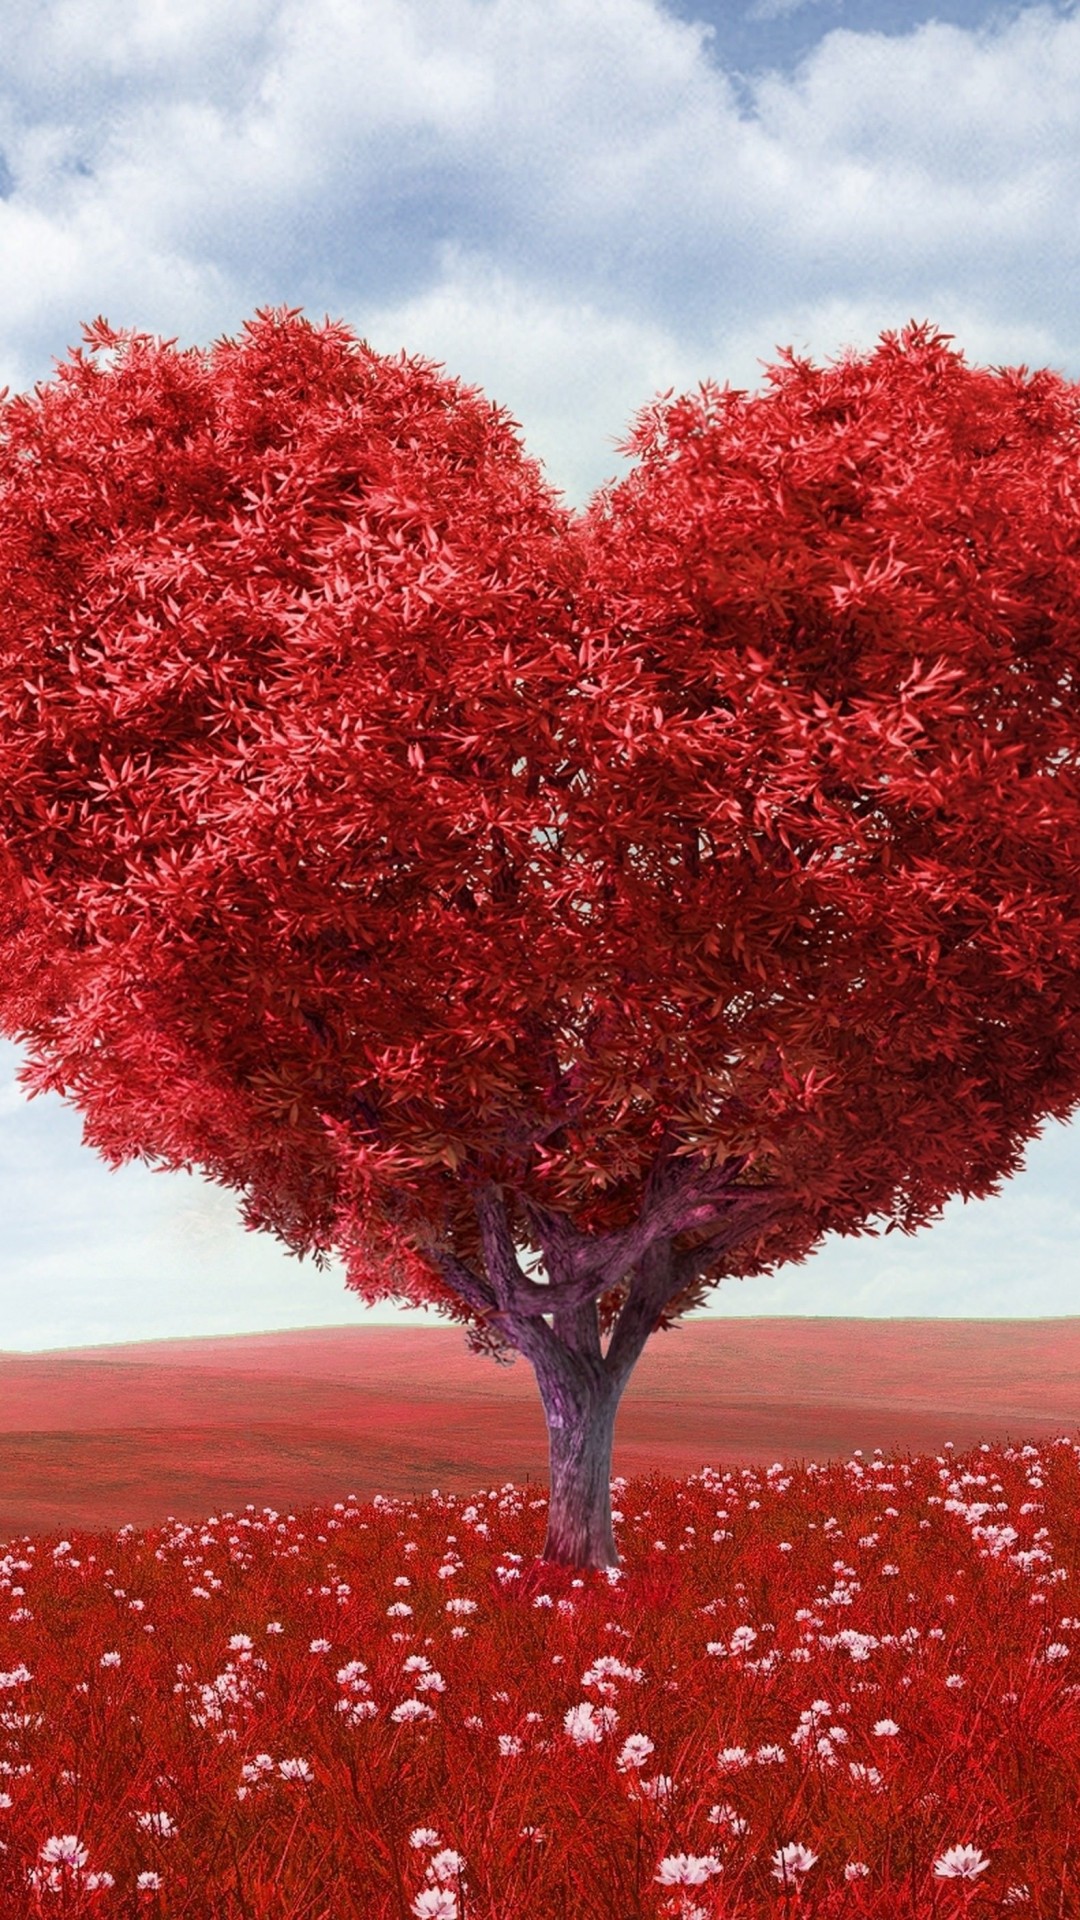 The Tree Of Love Wallpaper for HTC One